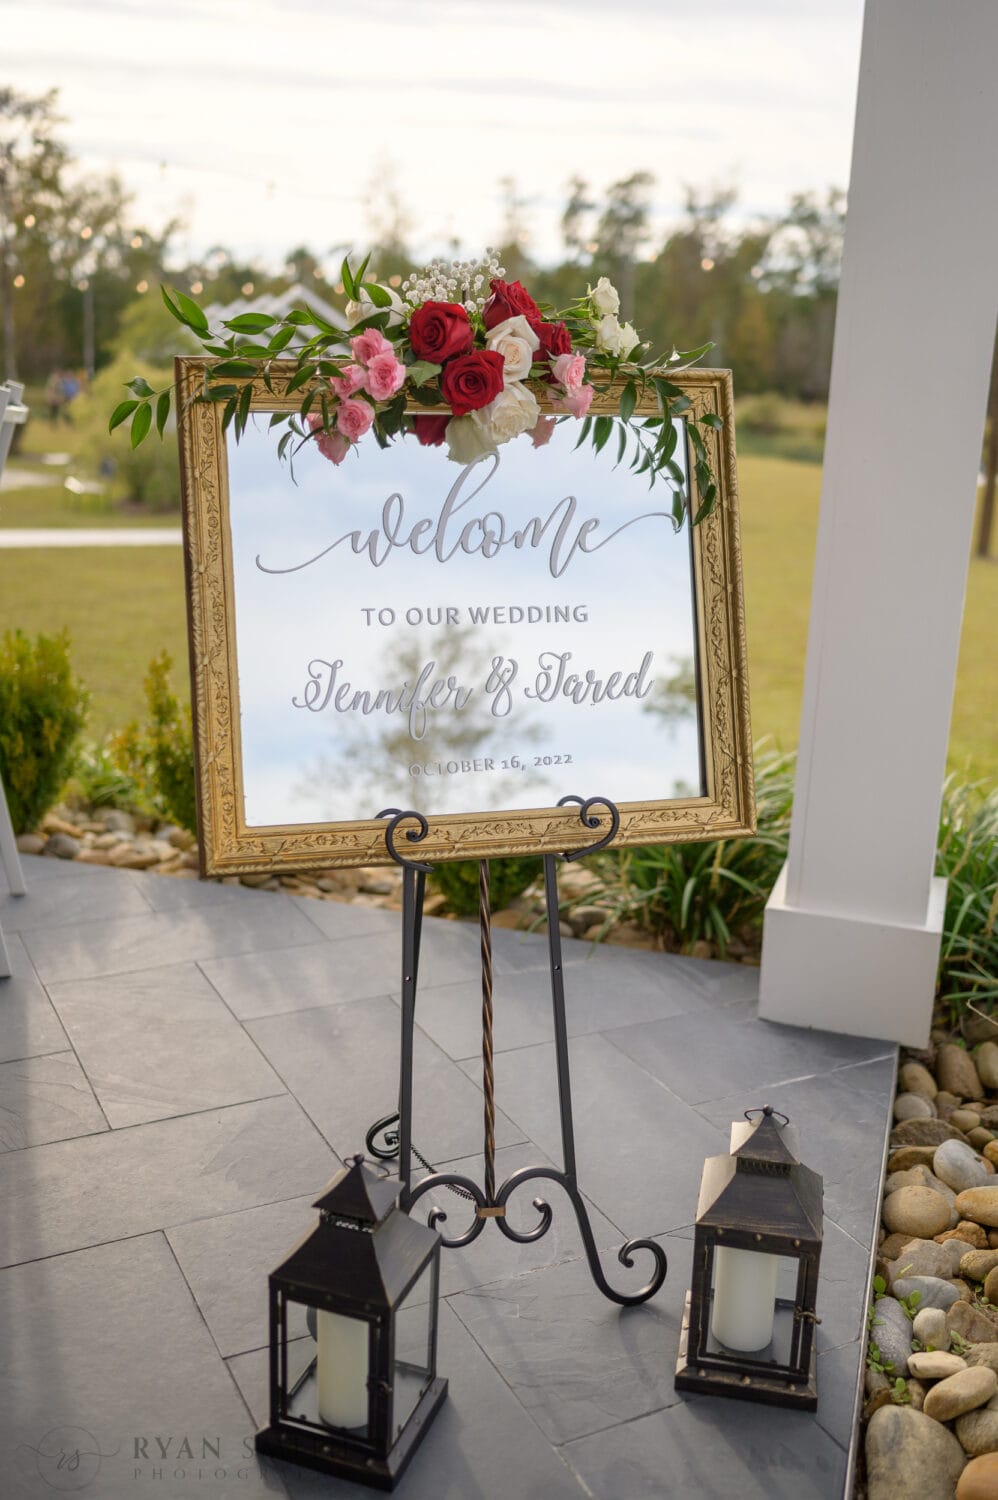 Welcome to our wedding sign - The Venue at White Oaks Farm